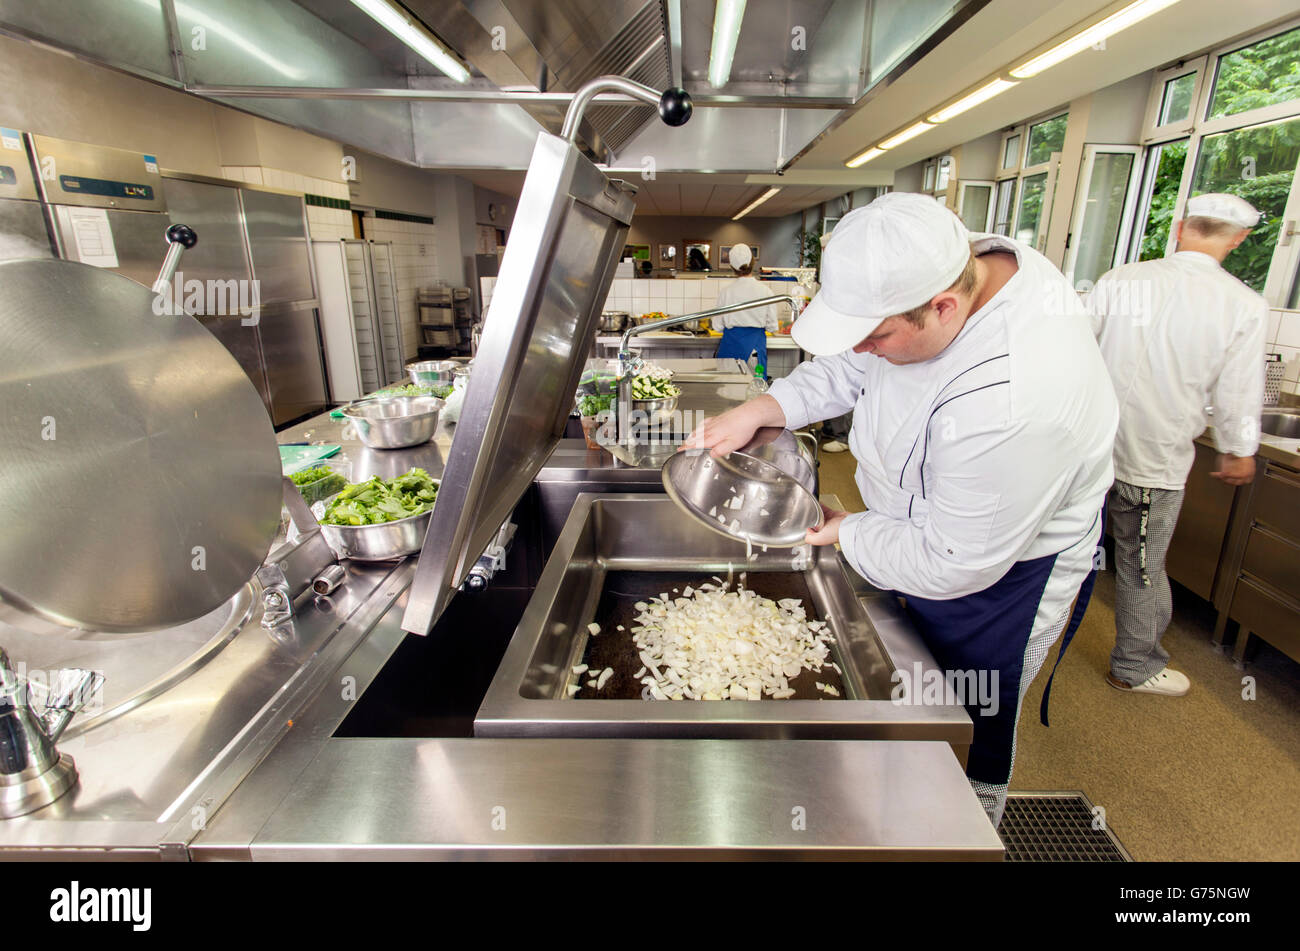 Preparation for lunch in a commercial kitchen. Stock Photo